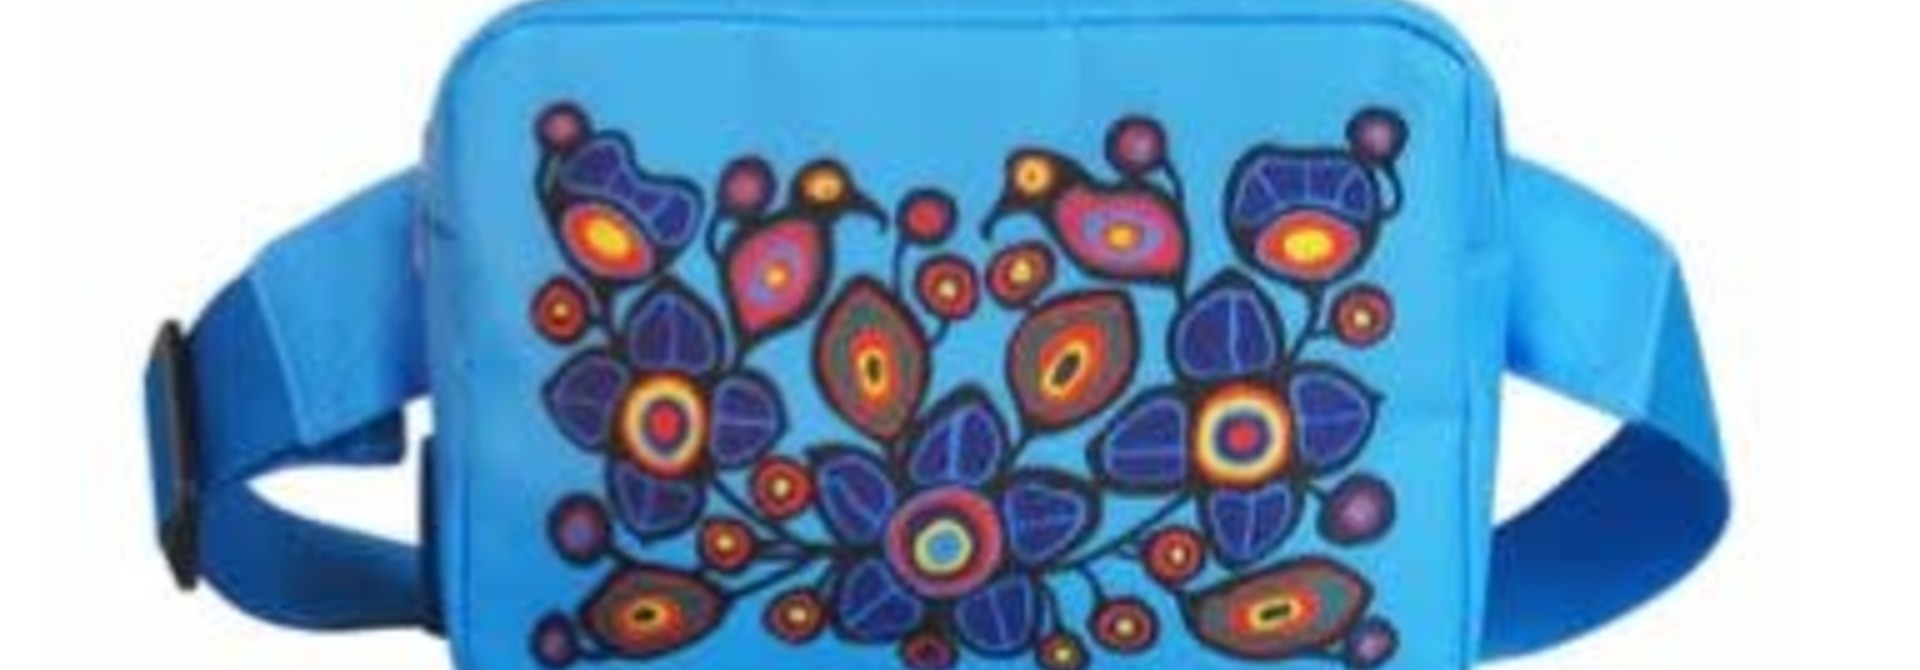 Hip Pack- Flowers and birds by Norval Morrisseau